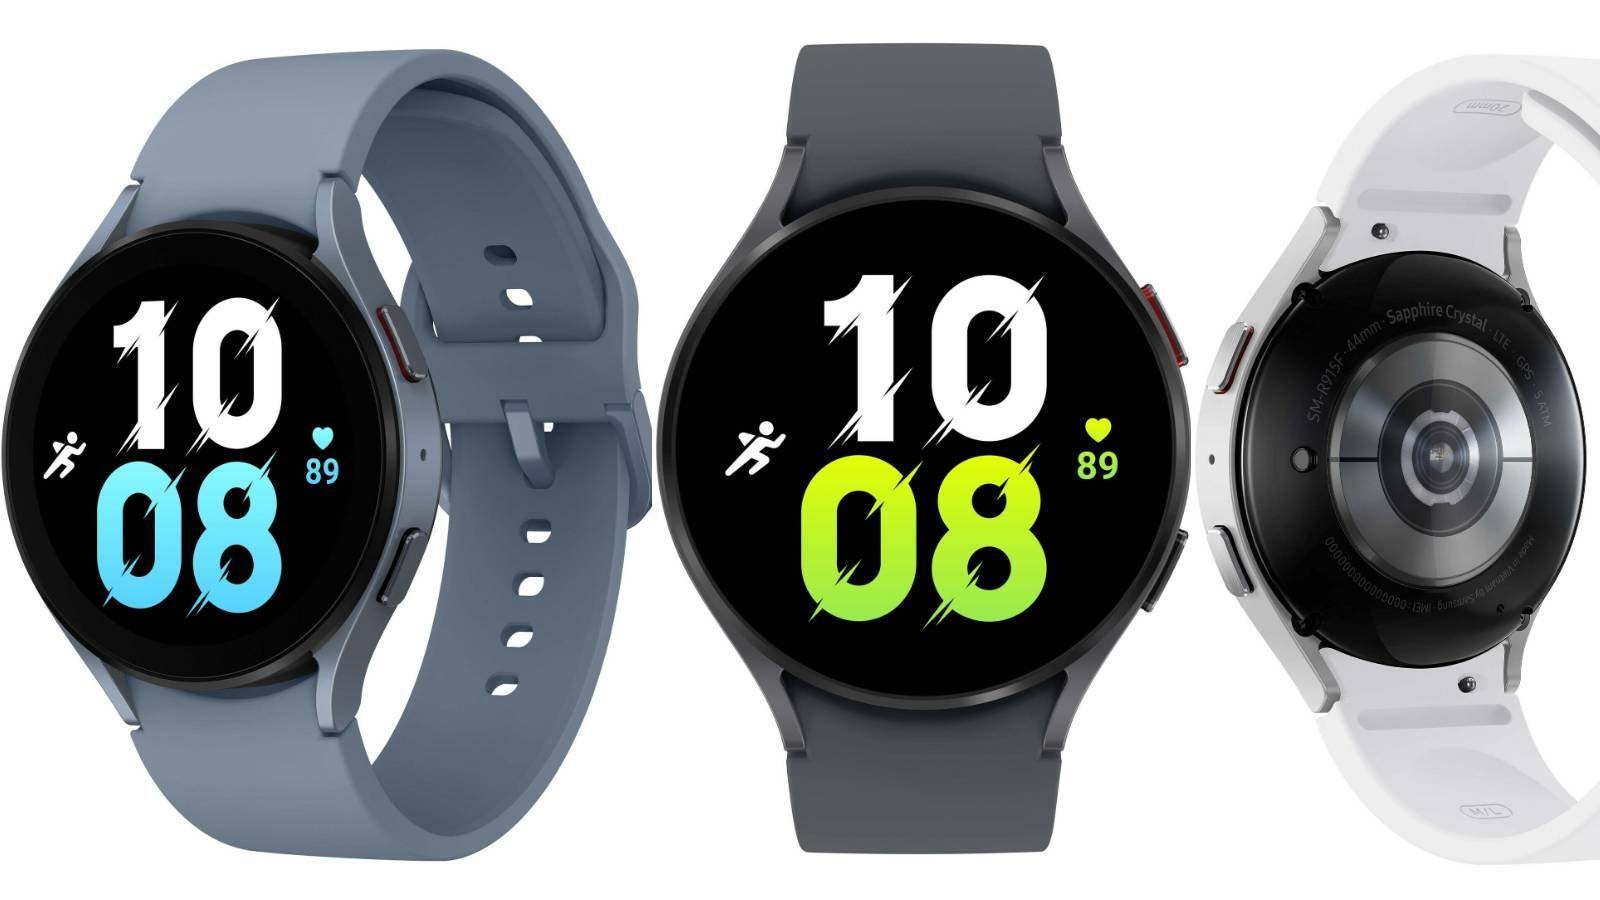 Bigger Galaxy Watch 5 model - Outdoorsy Galaxy Watch 5 Pro tipped to offer phenomenal battery life